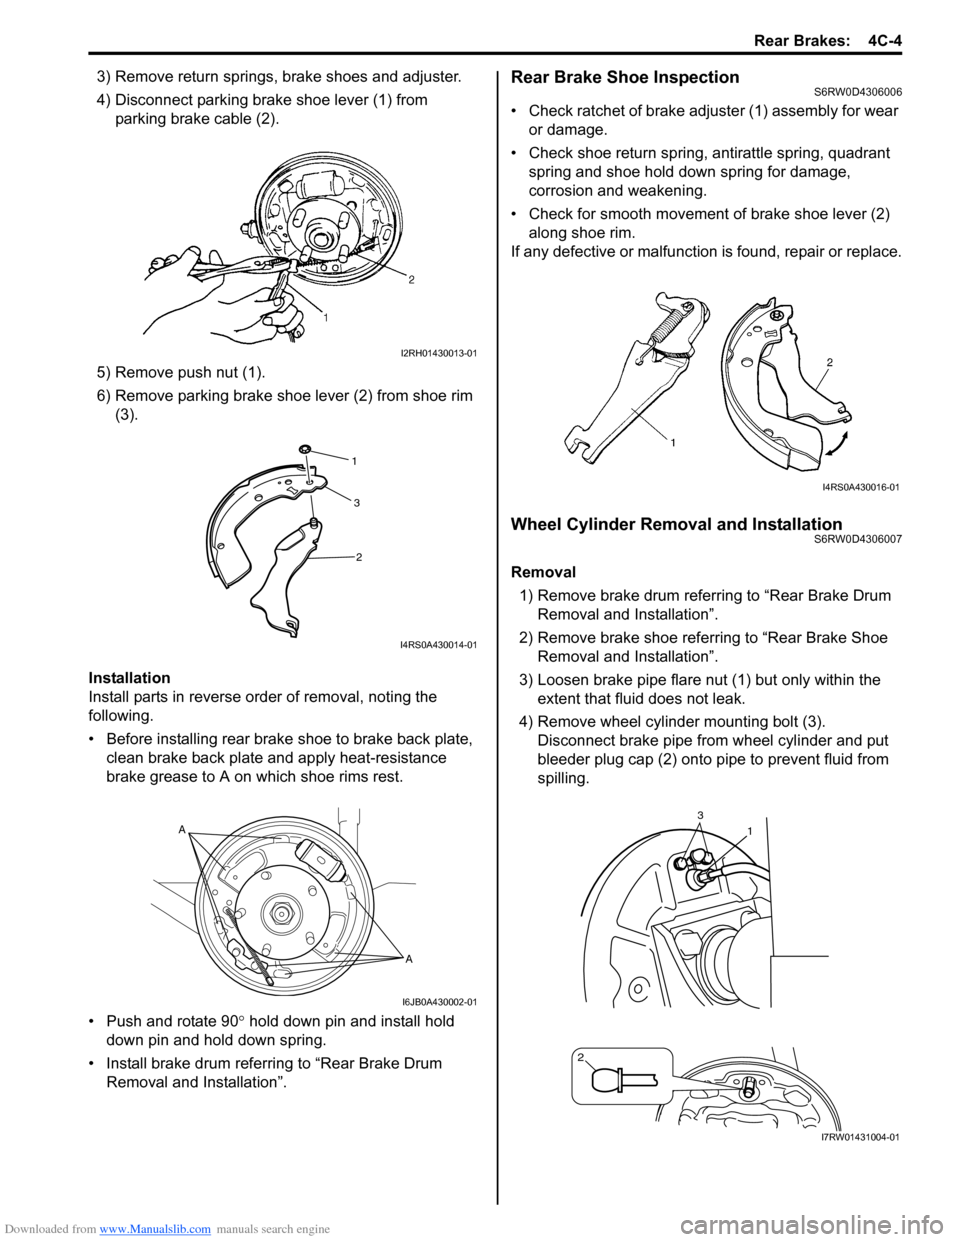 SUZUKI SX4 2006 1.G Service Workshop Manual Downloaded from www.Manualslib.com manuals search engine Rear Brakes:  4C-4
3) Remove return springs, brake shoes and adjuster.
4) Disconnect parking brake shoe lever (1) from 
parking brake cable (2)